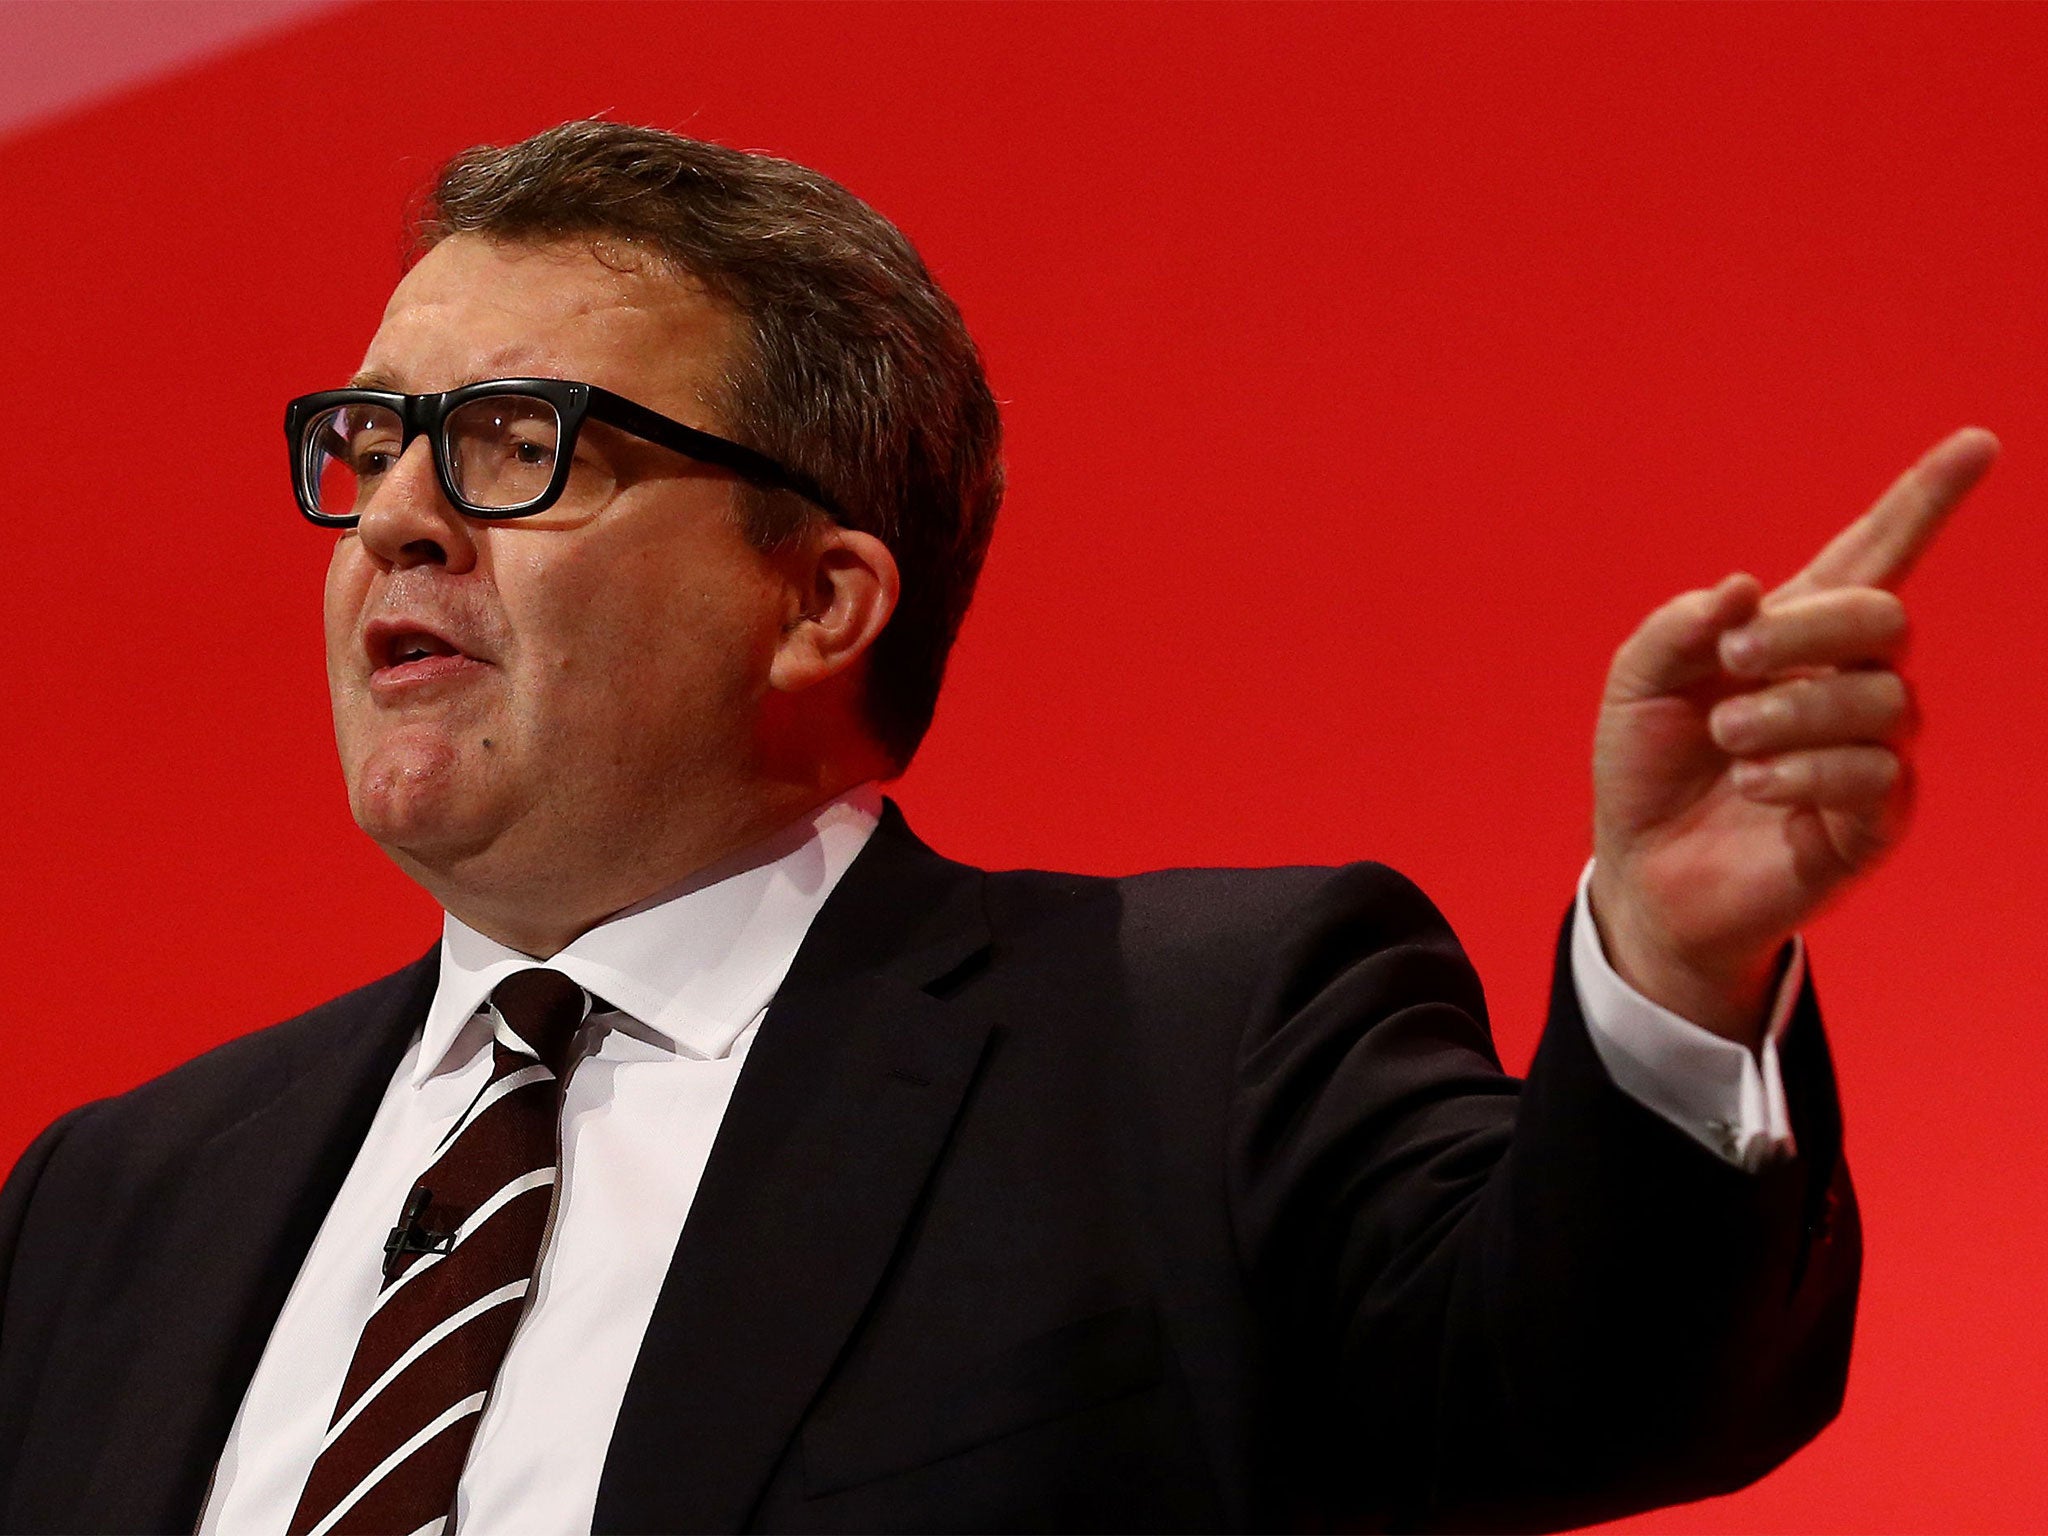 Tom Watson has been a driving force behind the investigation into the so-called 'VIP paedophile ring'